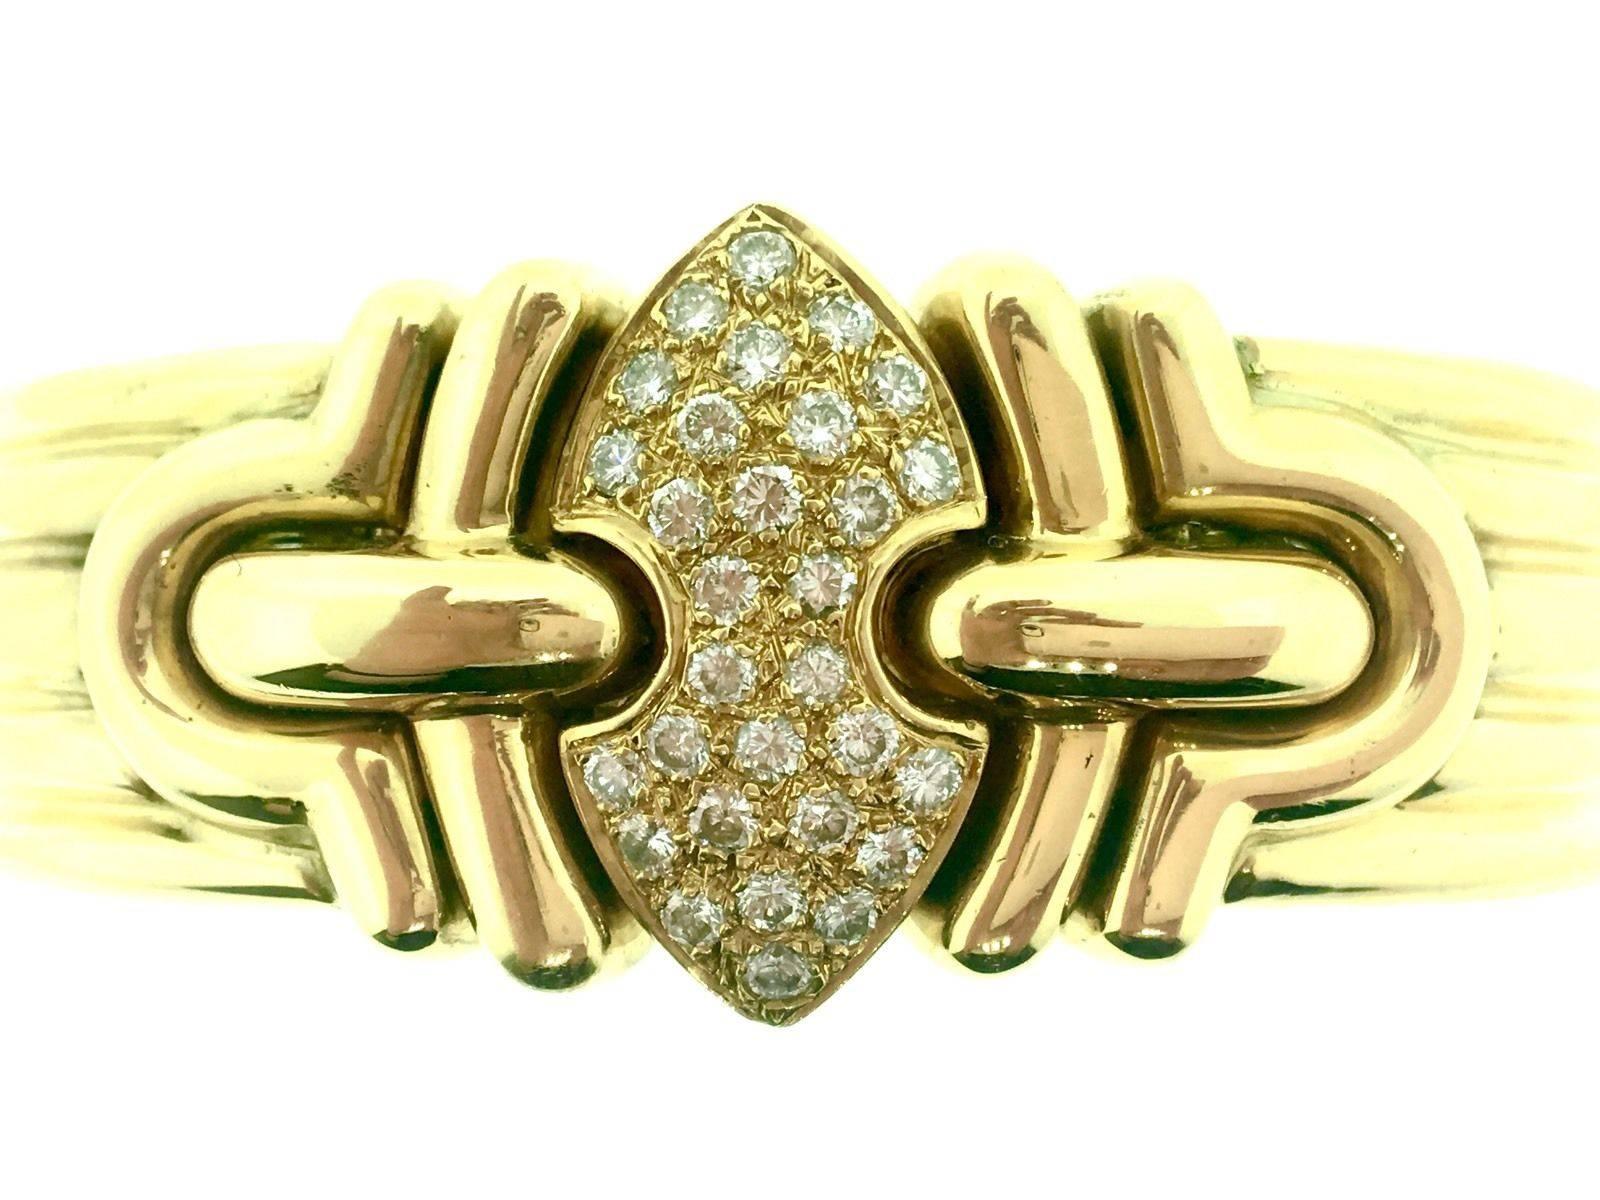 Heavy Cuff Bracelet in 18k Yellow Gold, wide ridged design, with 30 round full cut diamonds in the center of the cuff totaling an estimated 1.60 carats.
Diamond quality is estimated G Color and VS2 Clarity. Unmarked; tested 18k.
Fits normal wrist